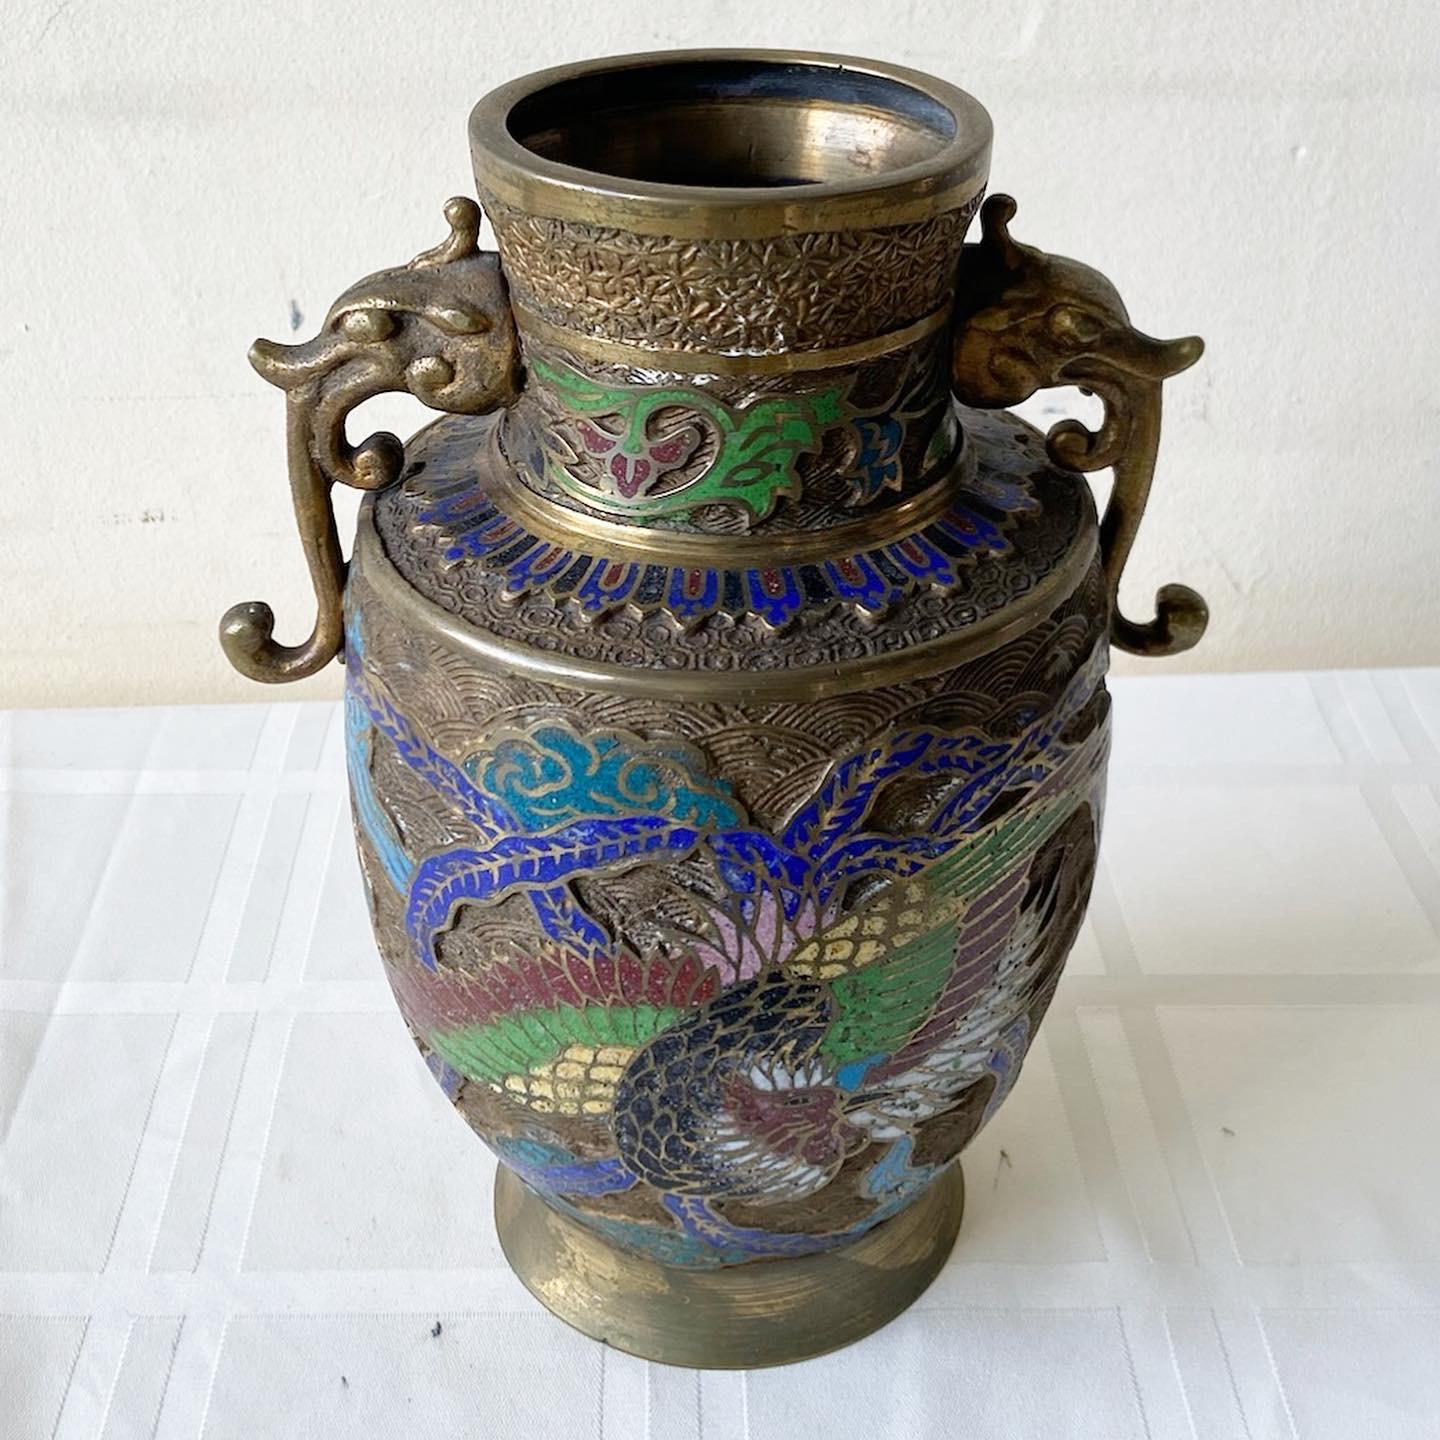 Amazing early 20th century Japanese brass champleve vases features a vibrant colorful enamel design depicting dragons.
 